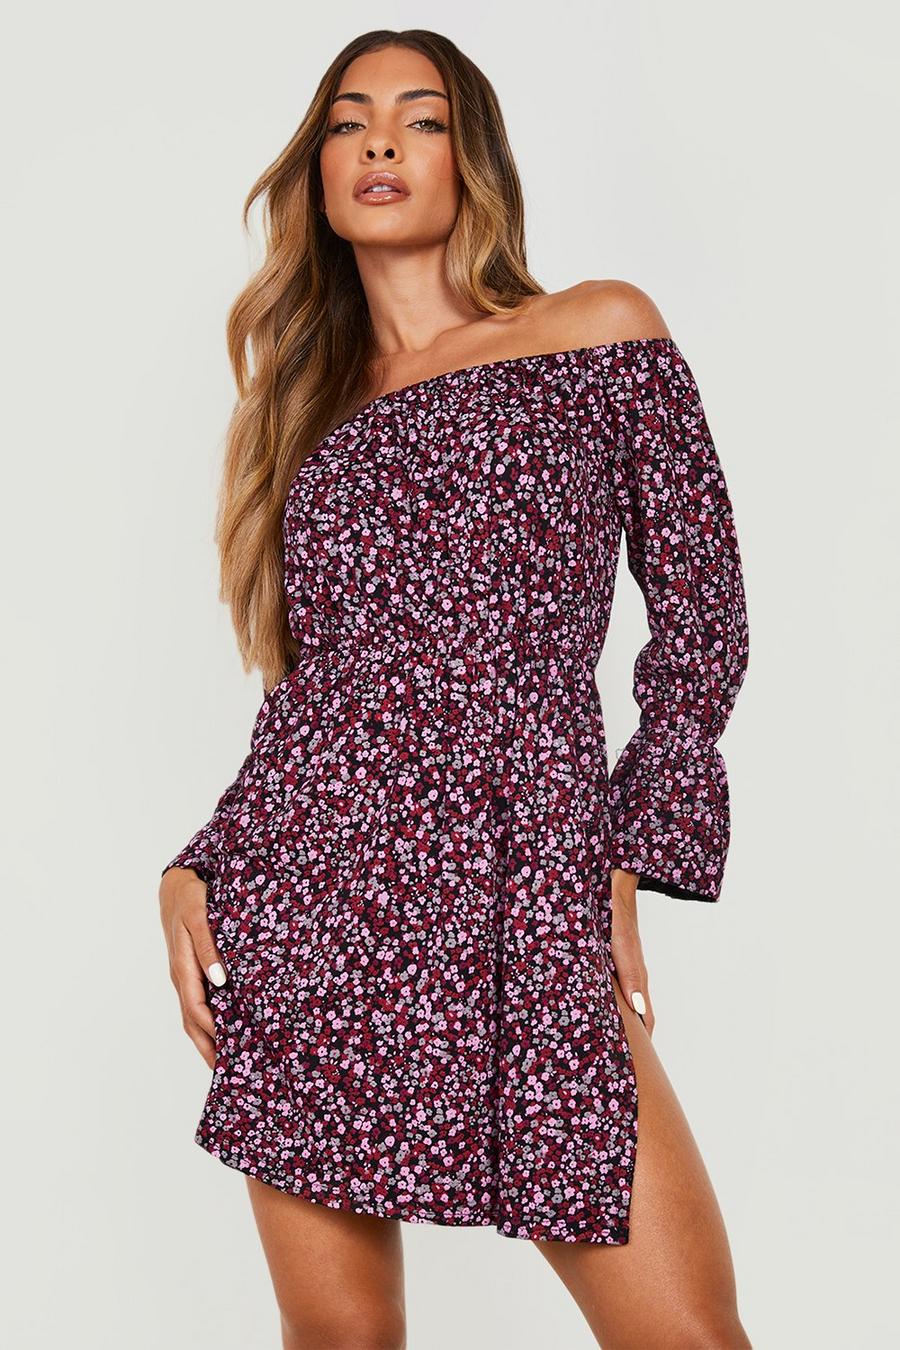 Boohoo Women Clothing Dresses Strapless Dresses 4 Womens Floral Off The Shoulder Flare Sleeve Smock Dress 